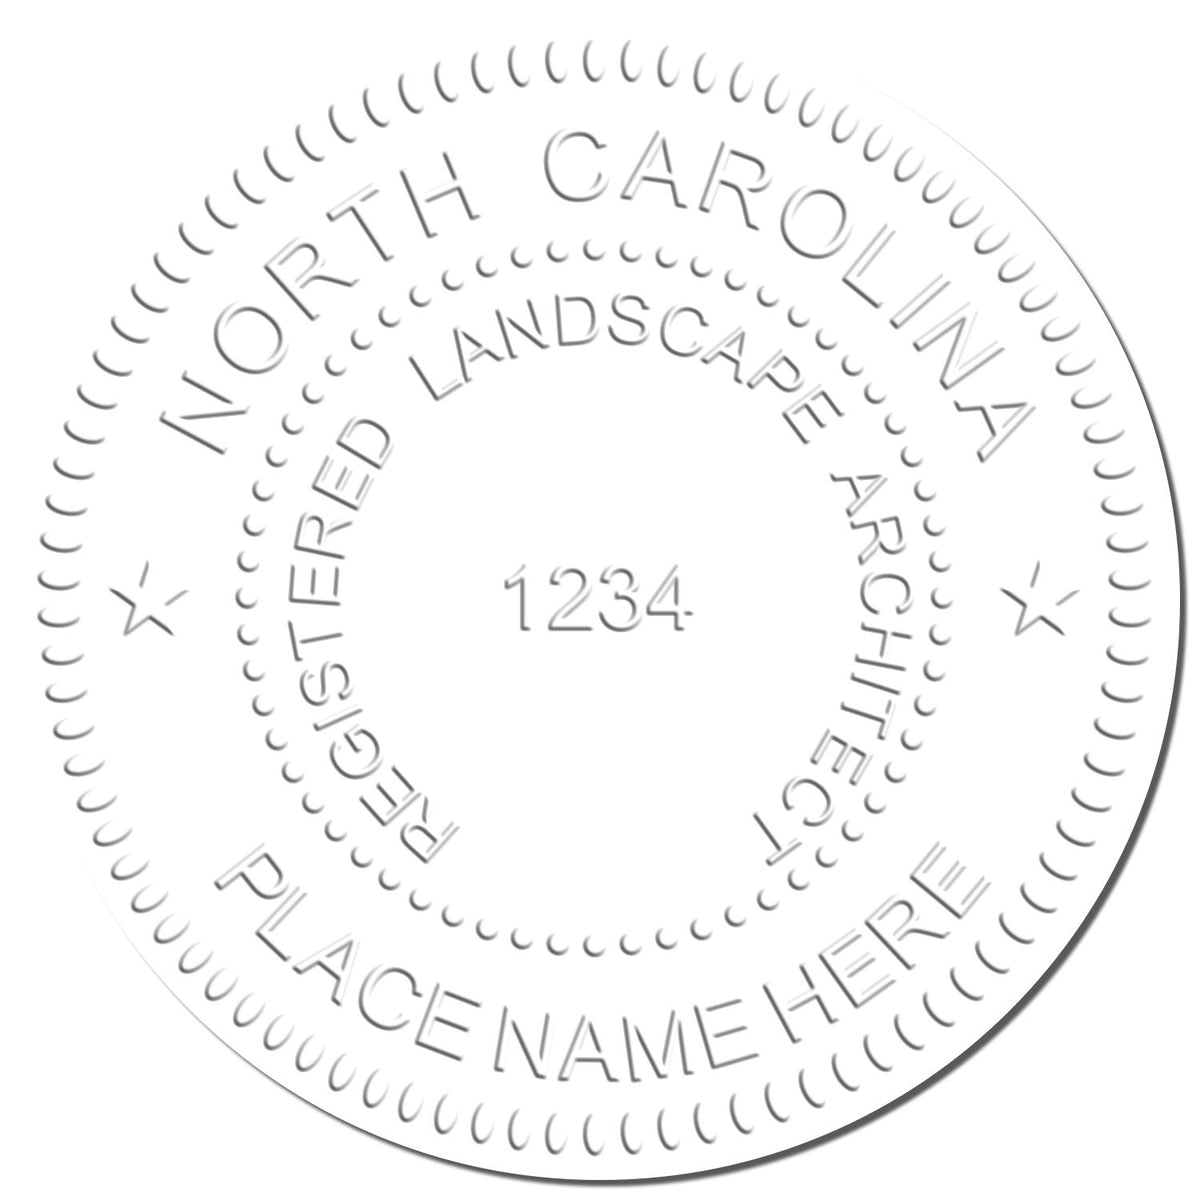 This paper is stamped with a sample imprint of the Hybrid North Carolina Landscape Architect Seal, signifying its quality and reliability.